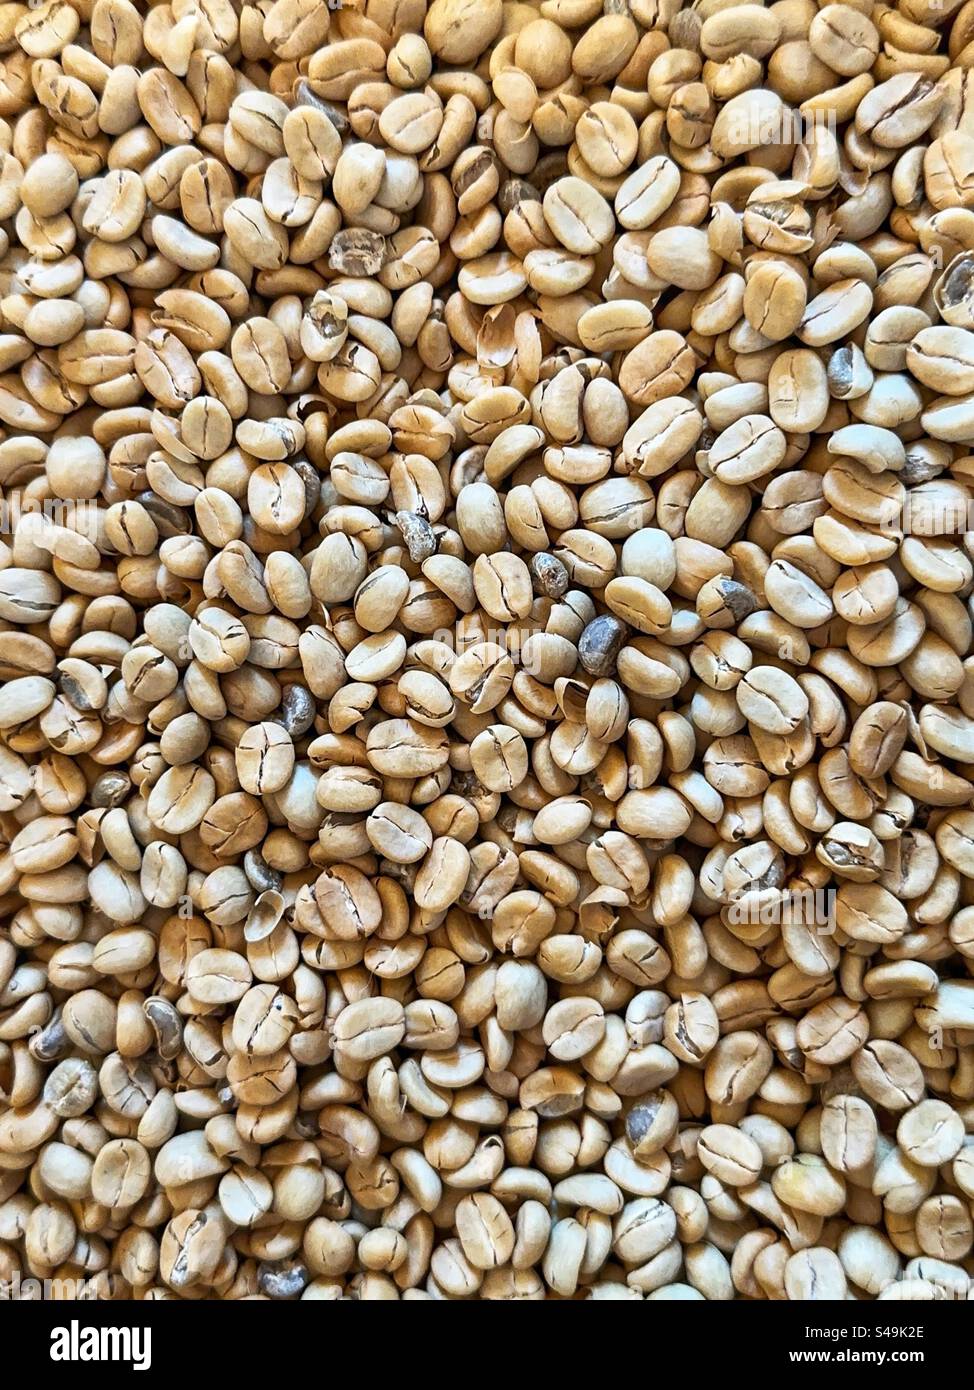 Coffee beans before drying and roasting. Backgrounds. No people. Stock Photo